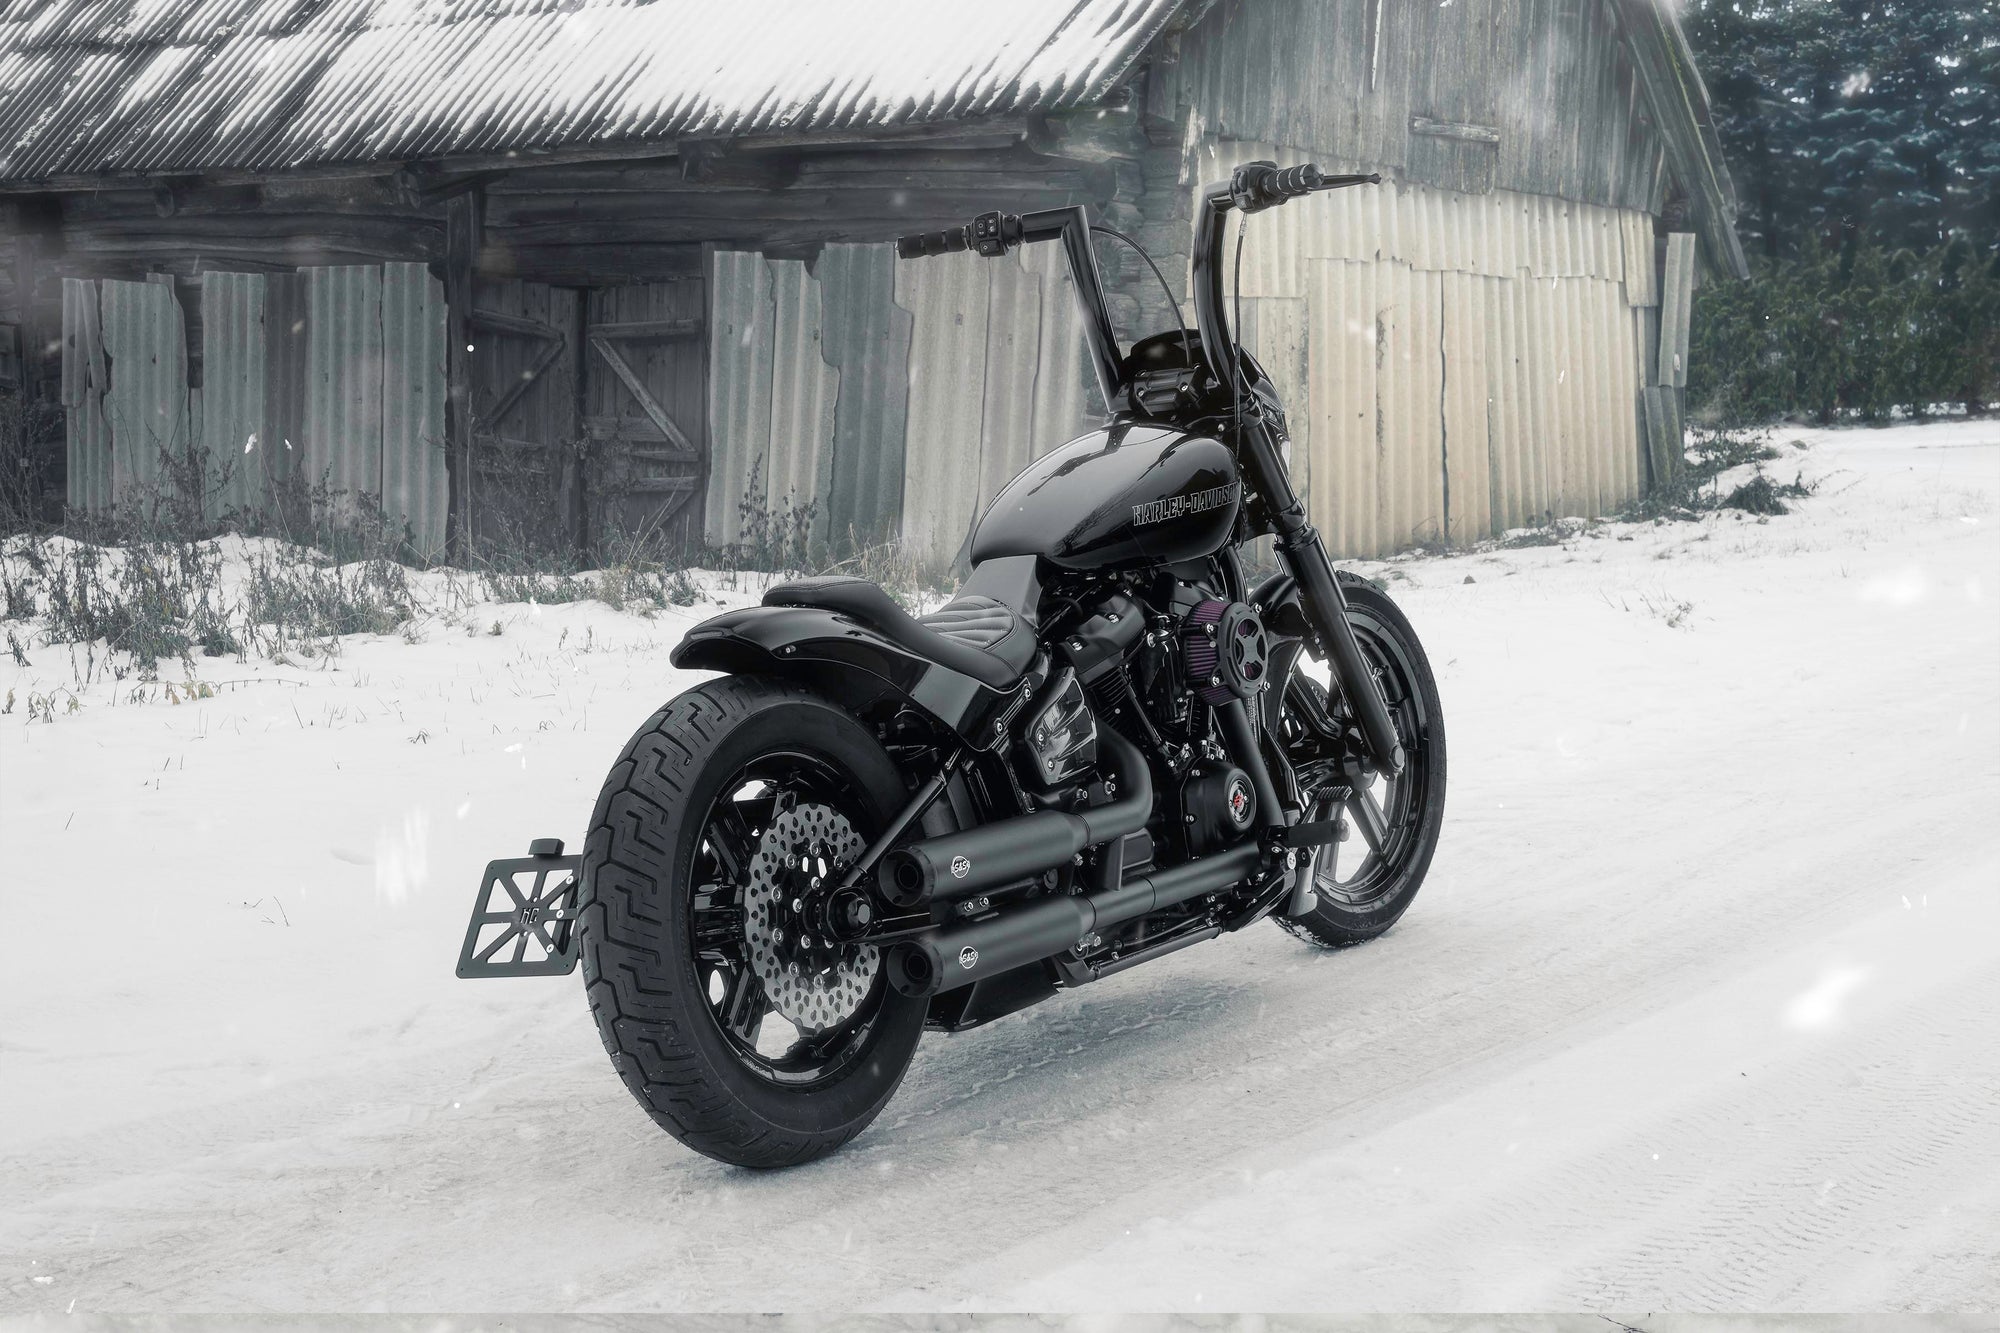 Harley Davidson motorcycle with Killer Custom parts from the rear outside on a snowy day with an abandoned shack in the background